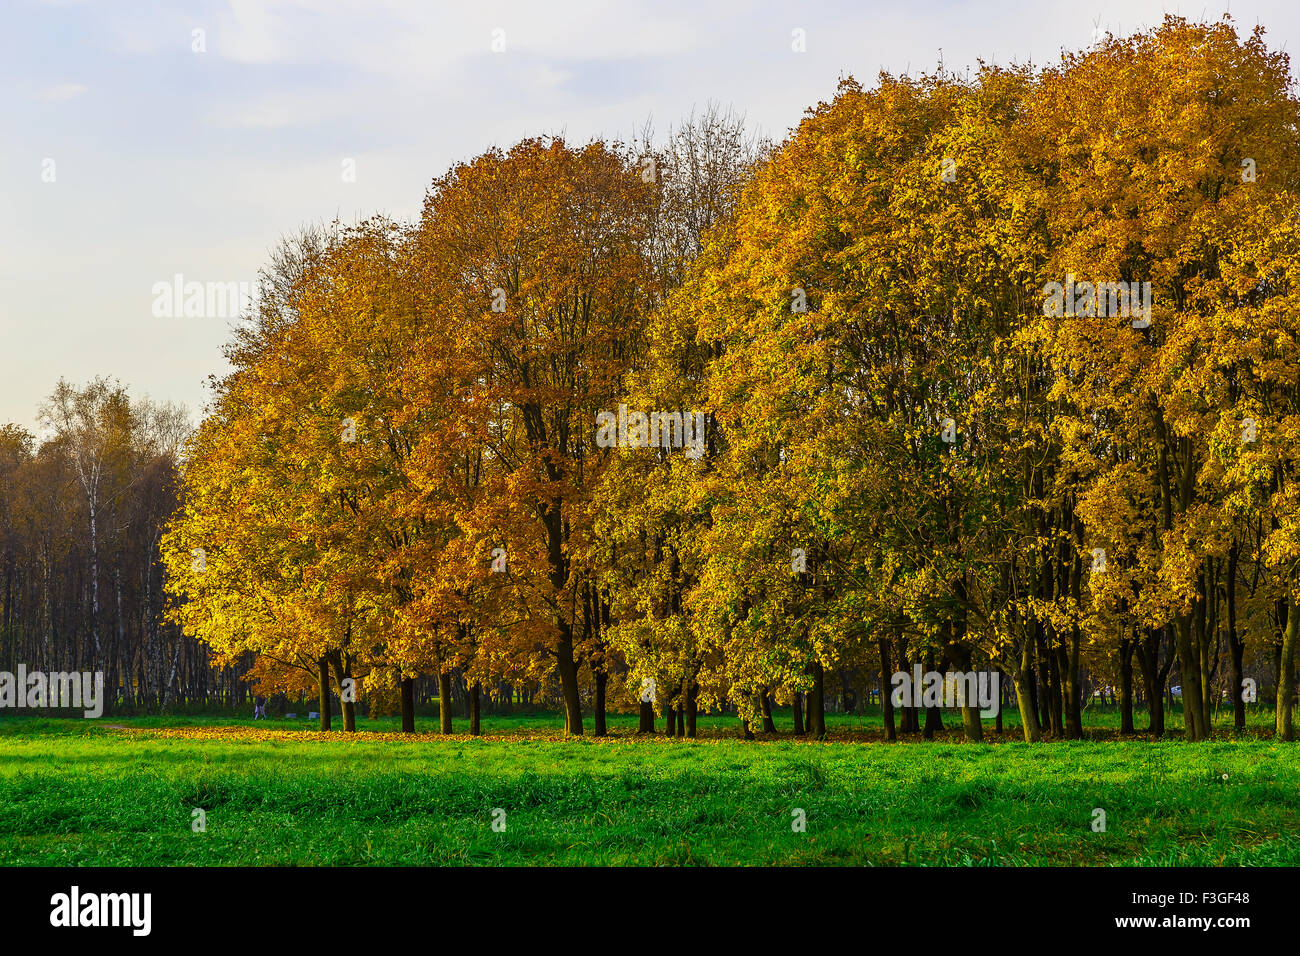 Colorful Autumn Trees on Green Lawn with Fallen Foliage under Trees in Park Stock Photo